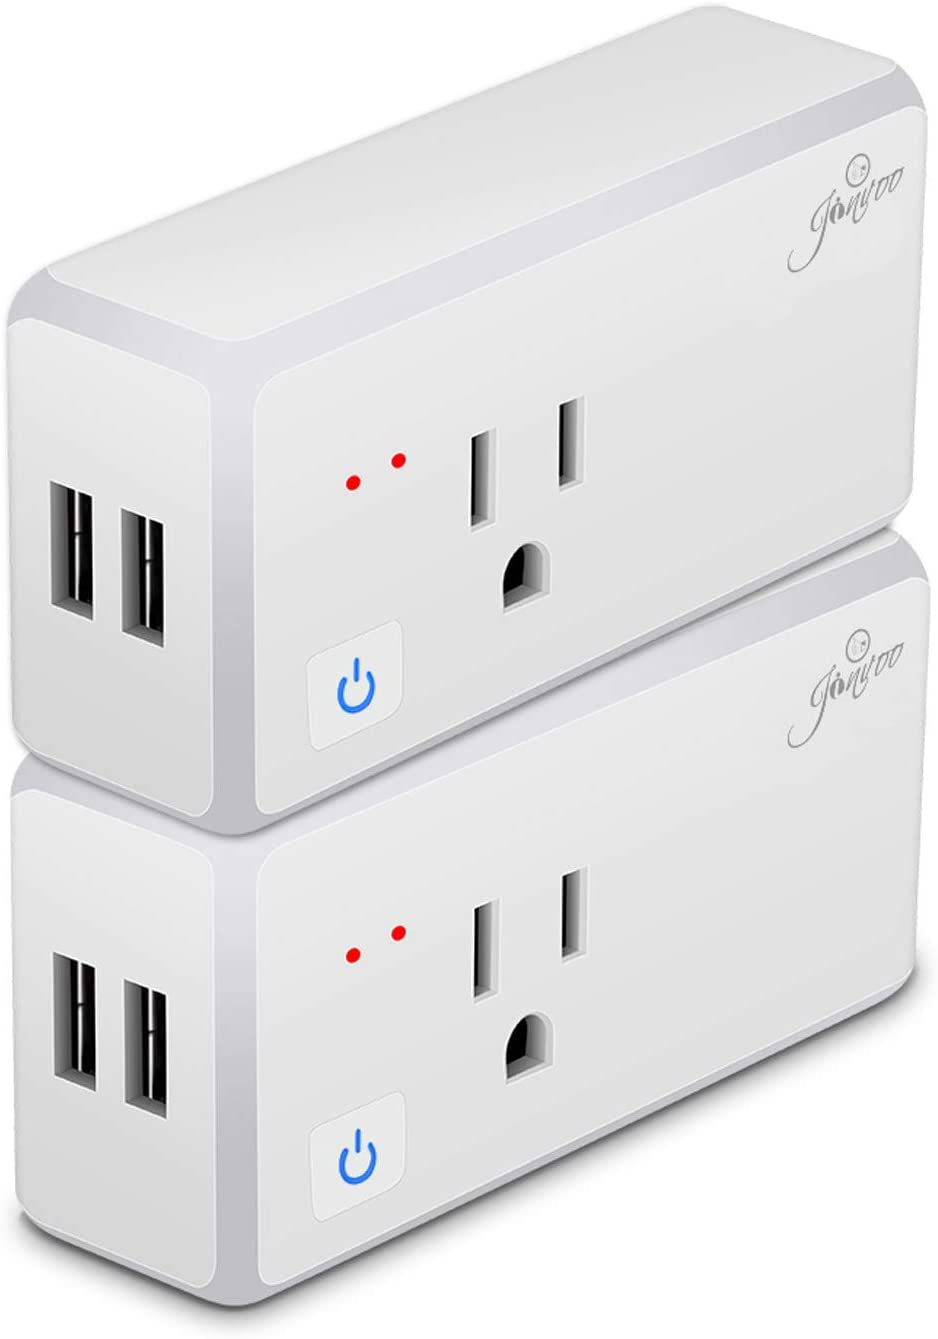 Wi-Fi Smart Plug Wireless Mini Outlet with Schedule Compatible with Alexa Echo, Works with Google Home